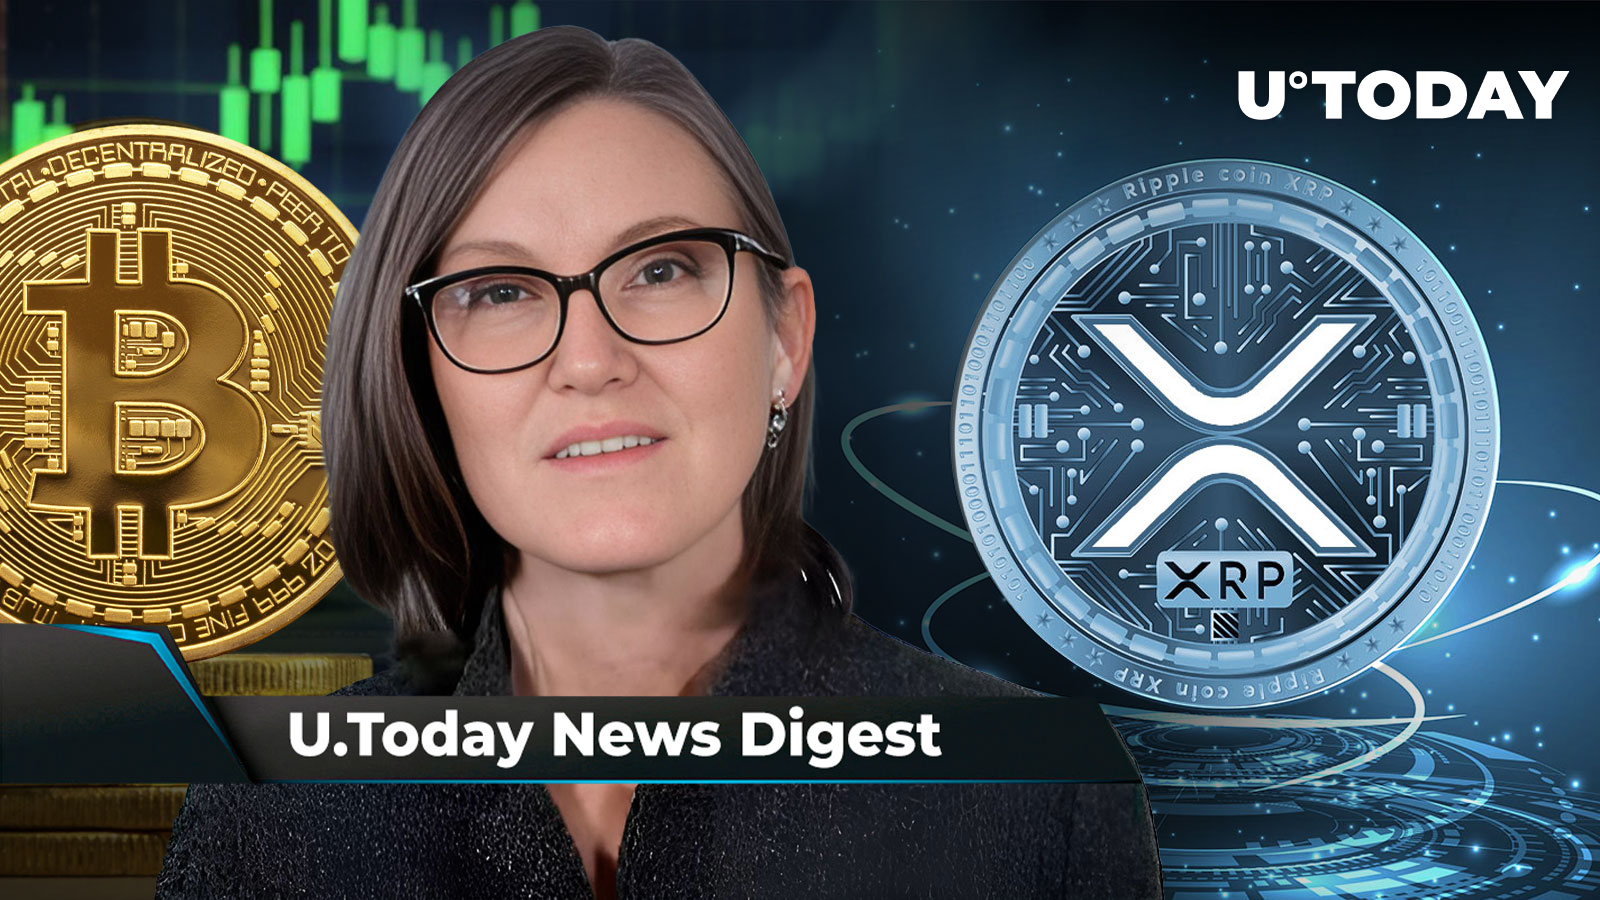 BTC Predicted to Reach 0,000 by Cathie Wood, XRP Relisted on Major Exchange, SHIB Rep Explains Why ShibaSwap 2.0 Not Released Yet: Crypto News Digest by U.Today